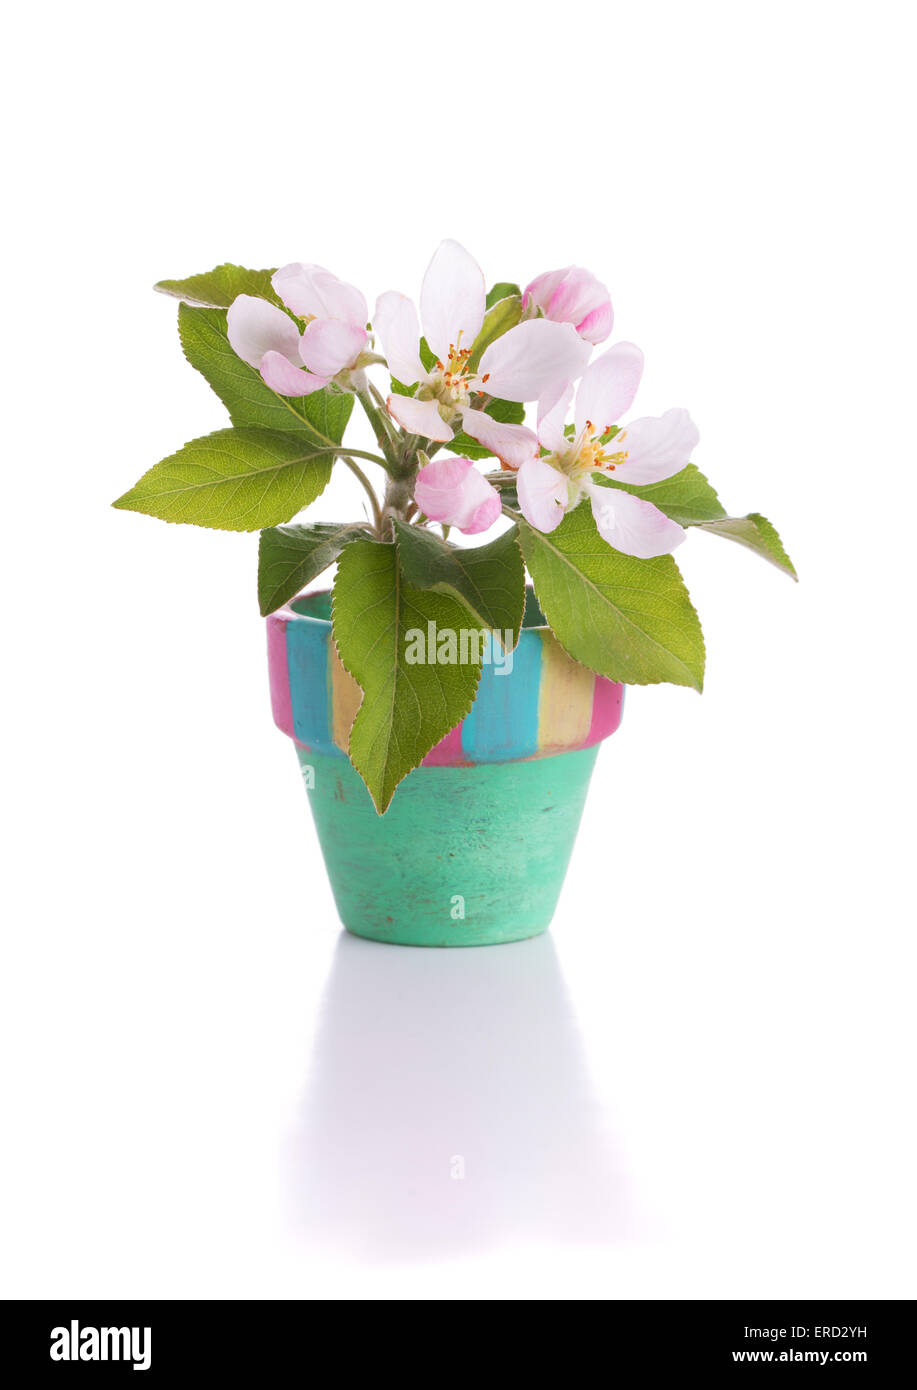 Pink and white apple flowers in a tiny pot Stock Photo